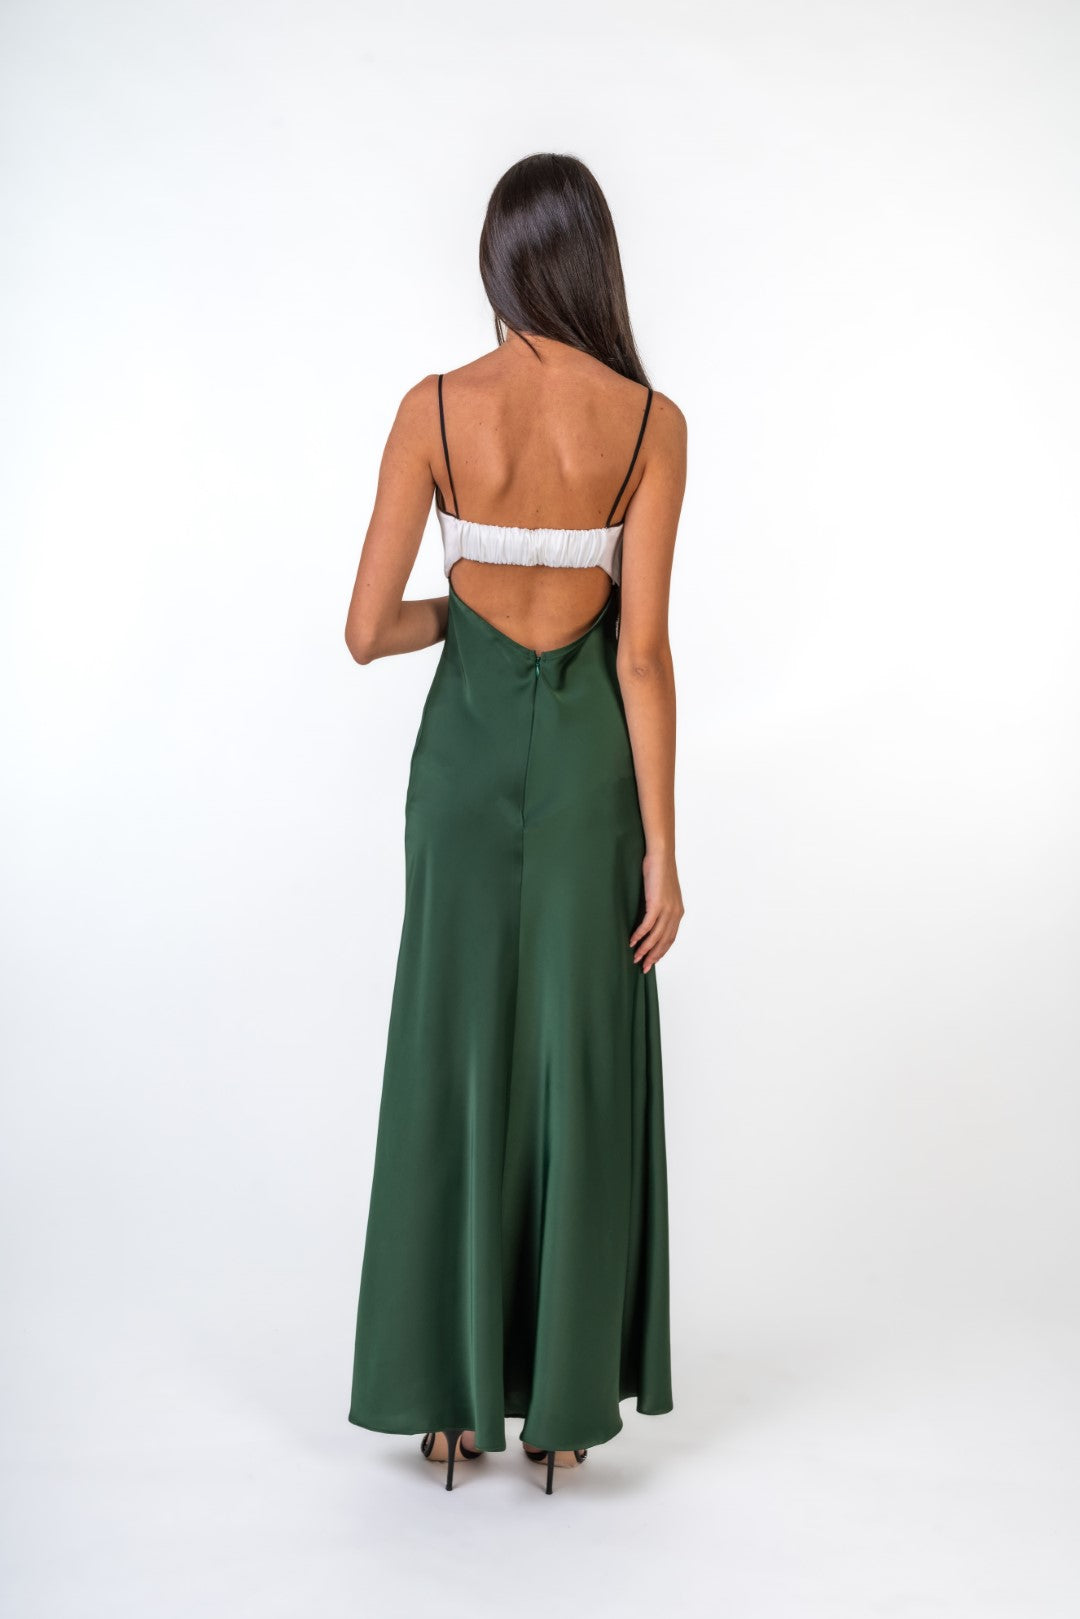 Maxi Dress with Open Back Details